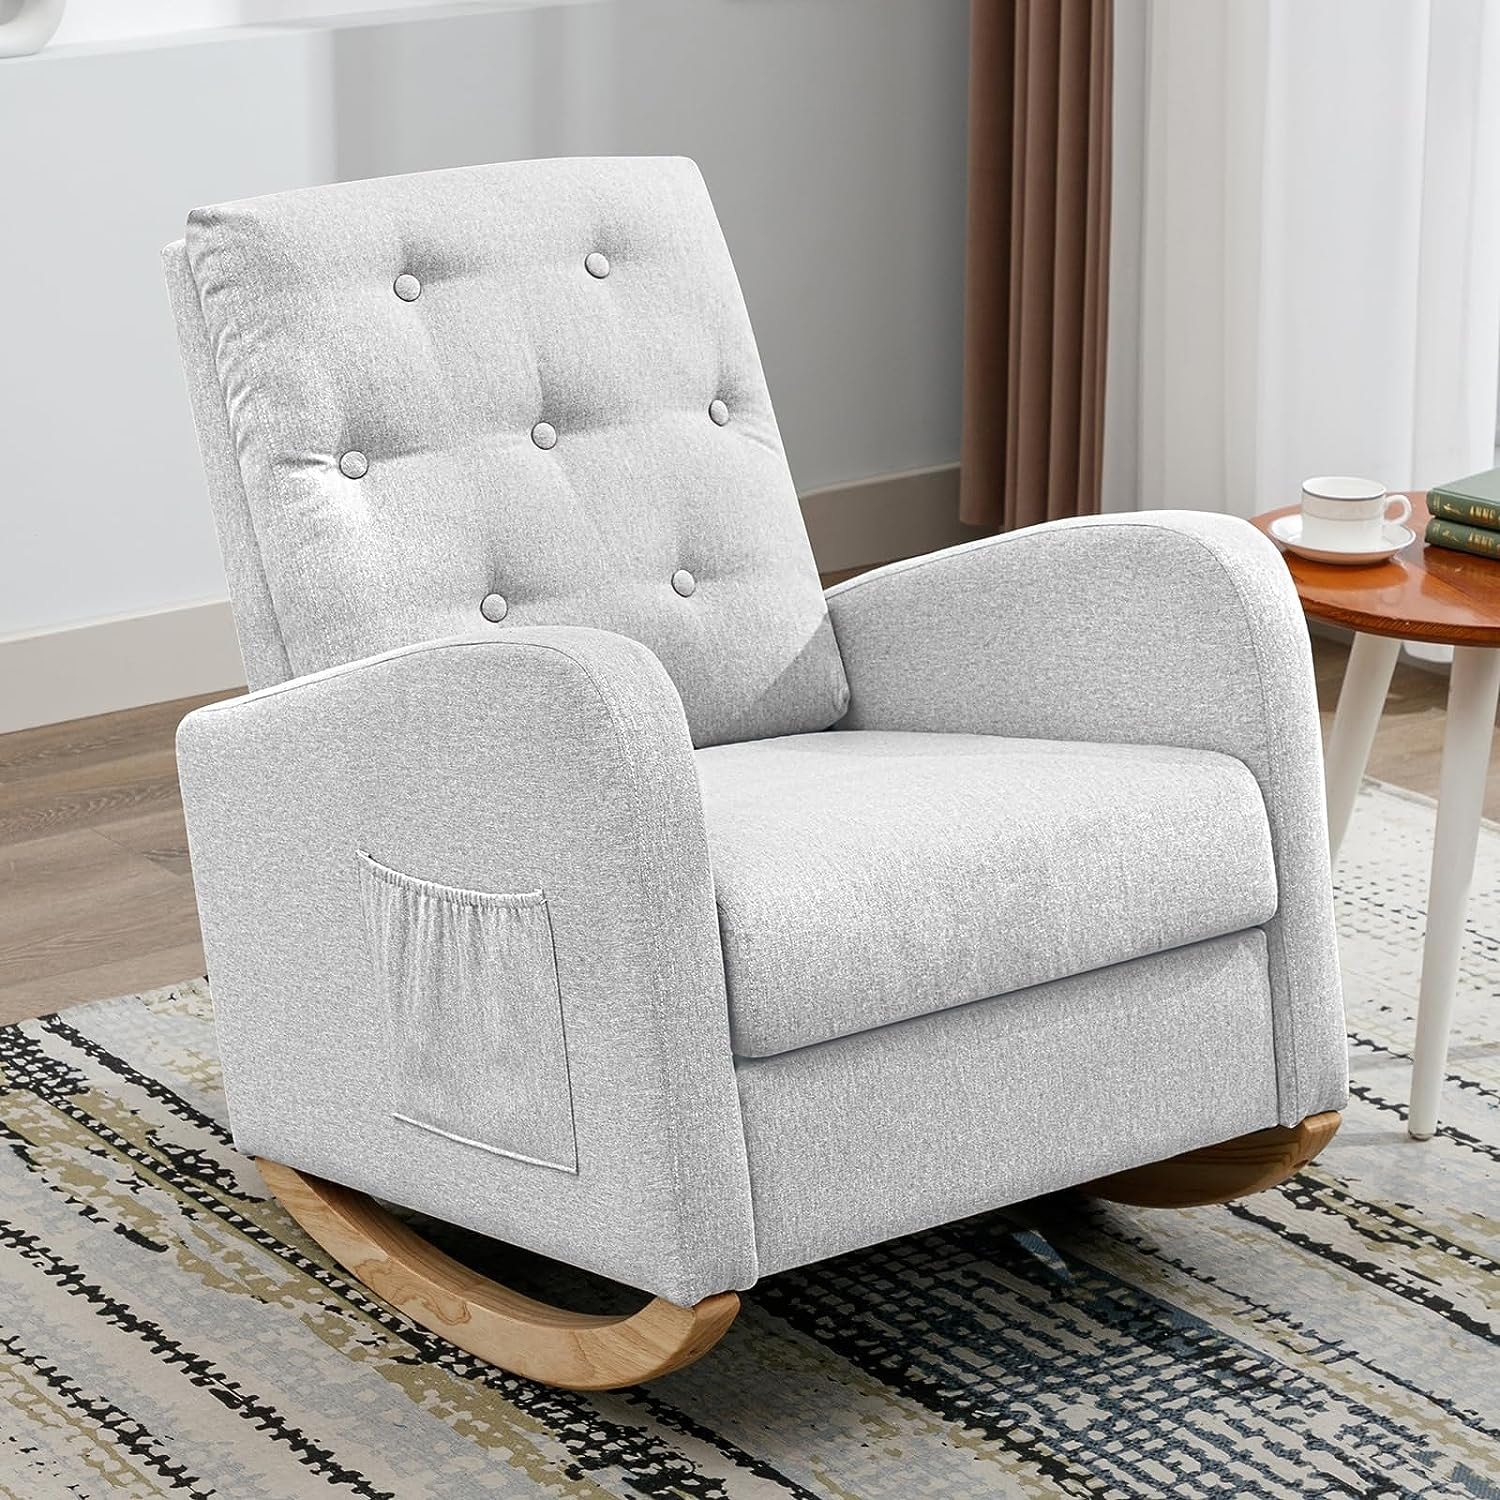 https://ak1.ostkcdn.com/images/products/is/images/direct/1df777203eb6f5c4e801175f57271a7a8863af7b/Mixoy-Modern-Rocking-Sofa-Chair%2C-Classic-Lounge-Arm-Chair%2C-Upholstered-Nursery-Chair%2C-Patio-Nursing-Armchair%2CAccent-Rocker-Chair.jpg